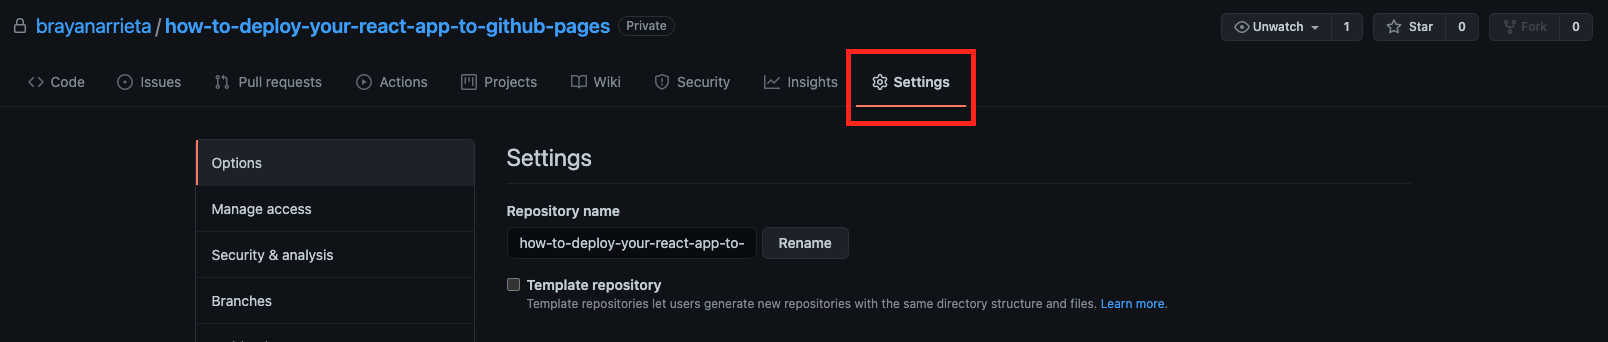 GitHub Pages Settings.png